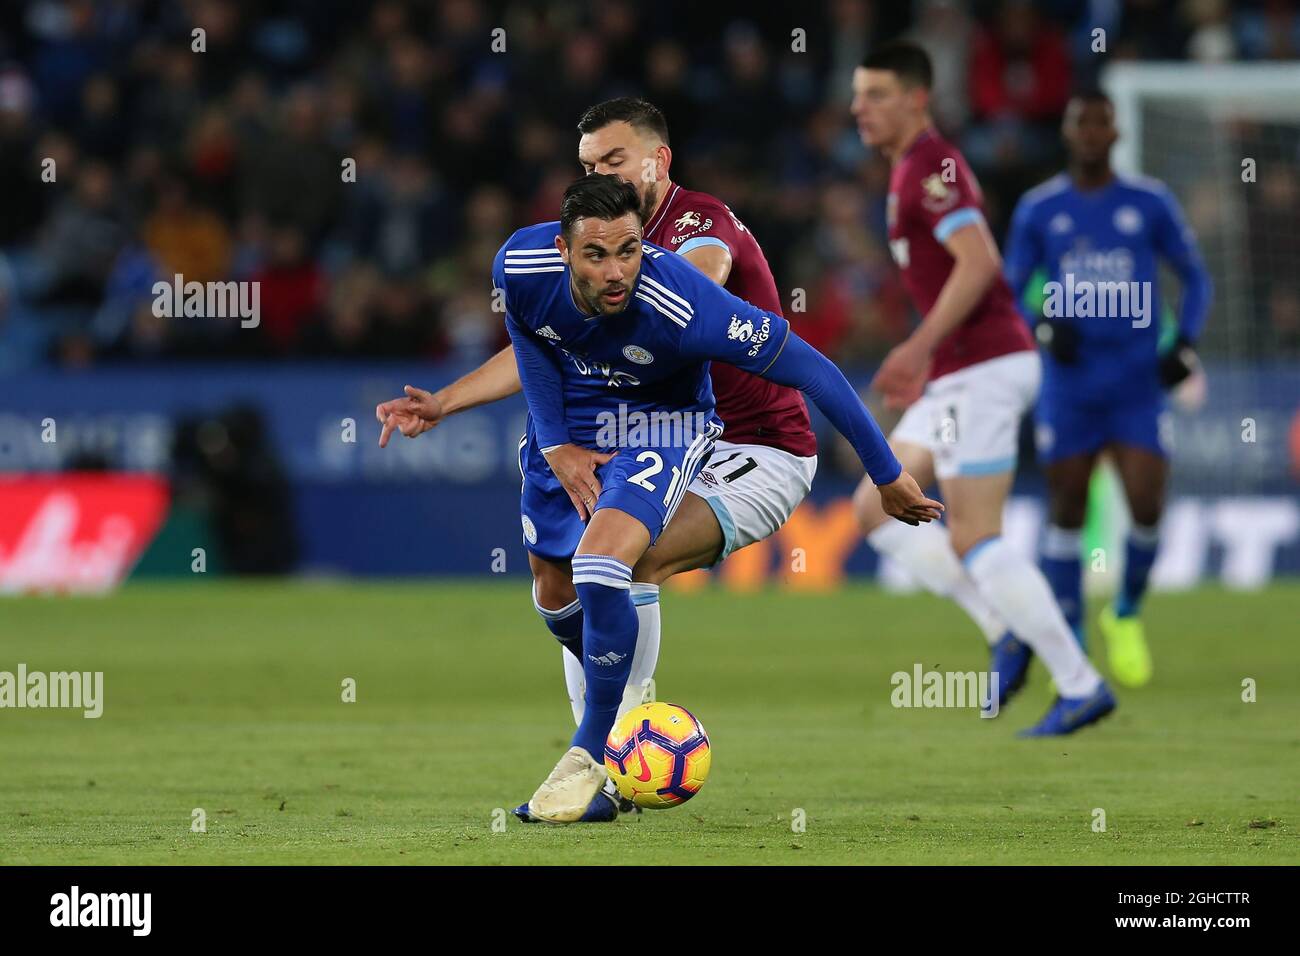 Vicente Iborra of Leicester City takes the ball away from Robert Snodgrass of West Ham United during the Premier League match at the King Power Stadium, Leicester. Picture date: 27th October 2018. Picture credit should read: James Wilson/Sportimage via PA Images Stock Photo